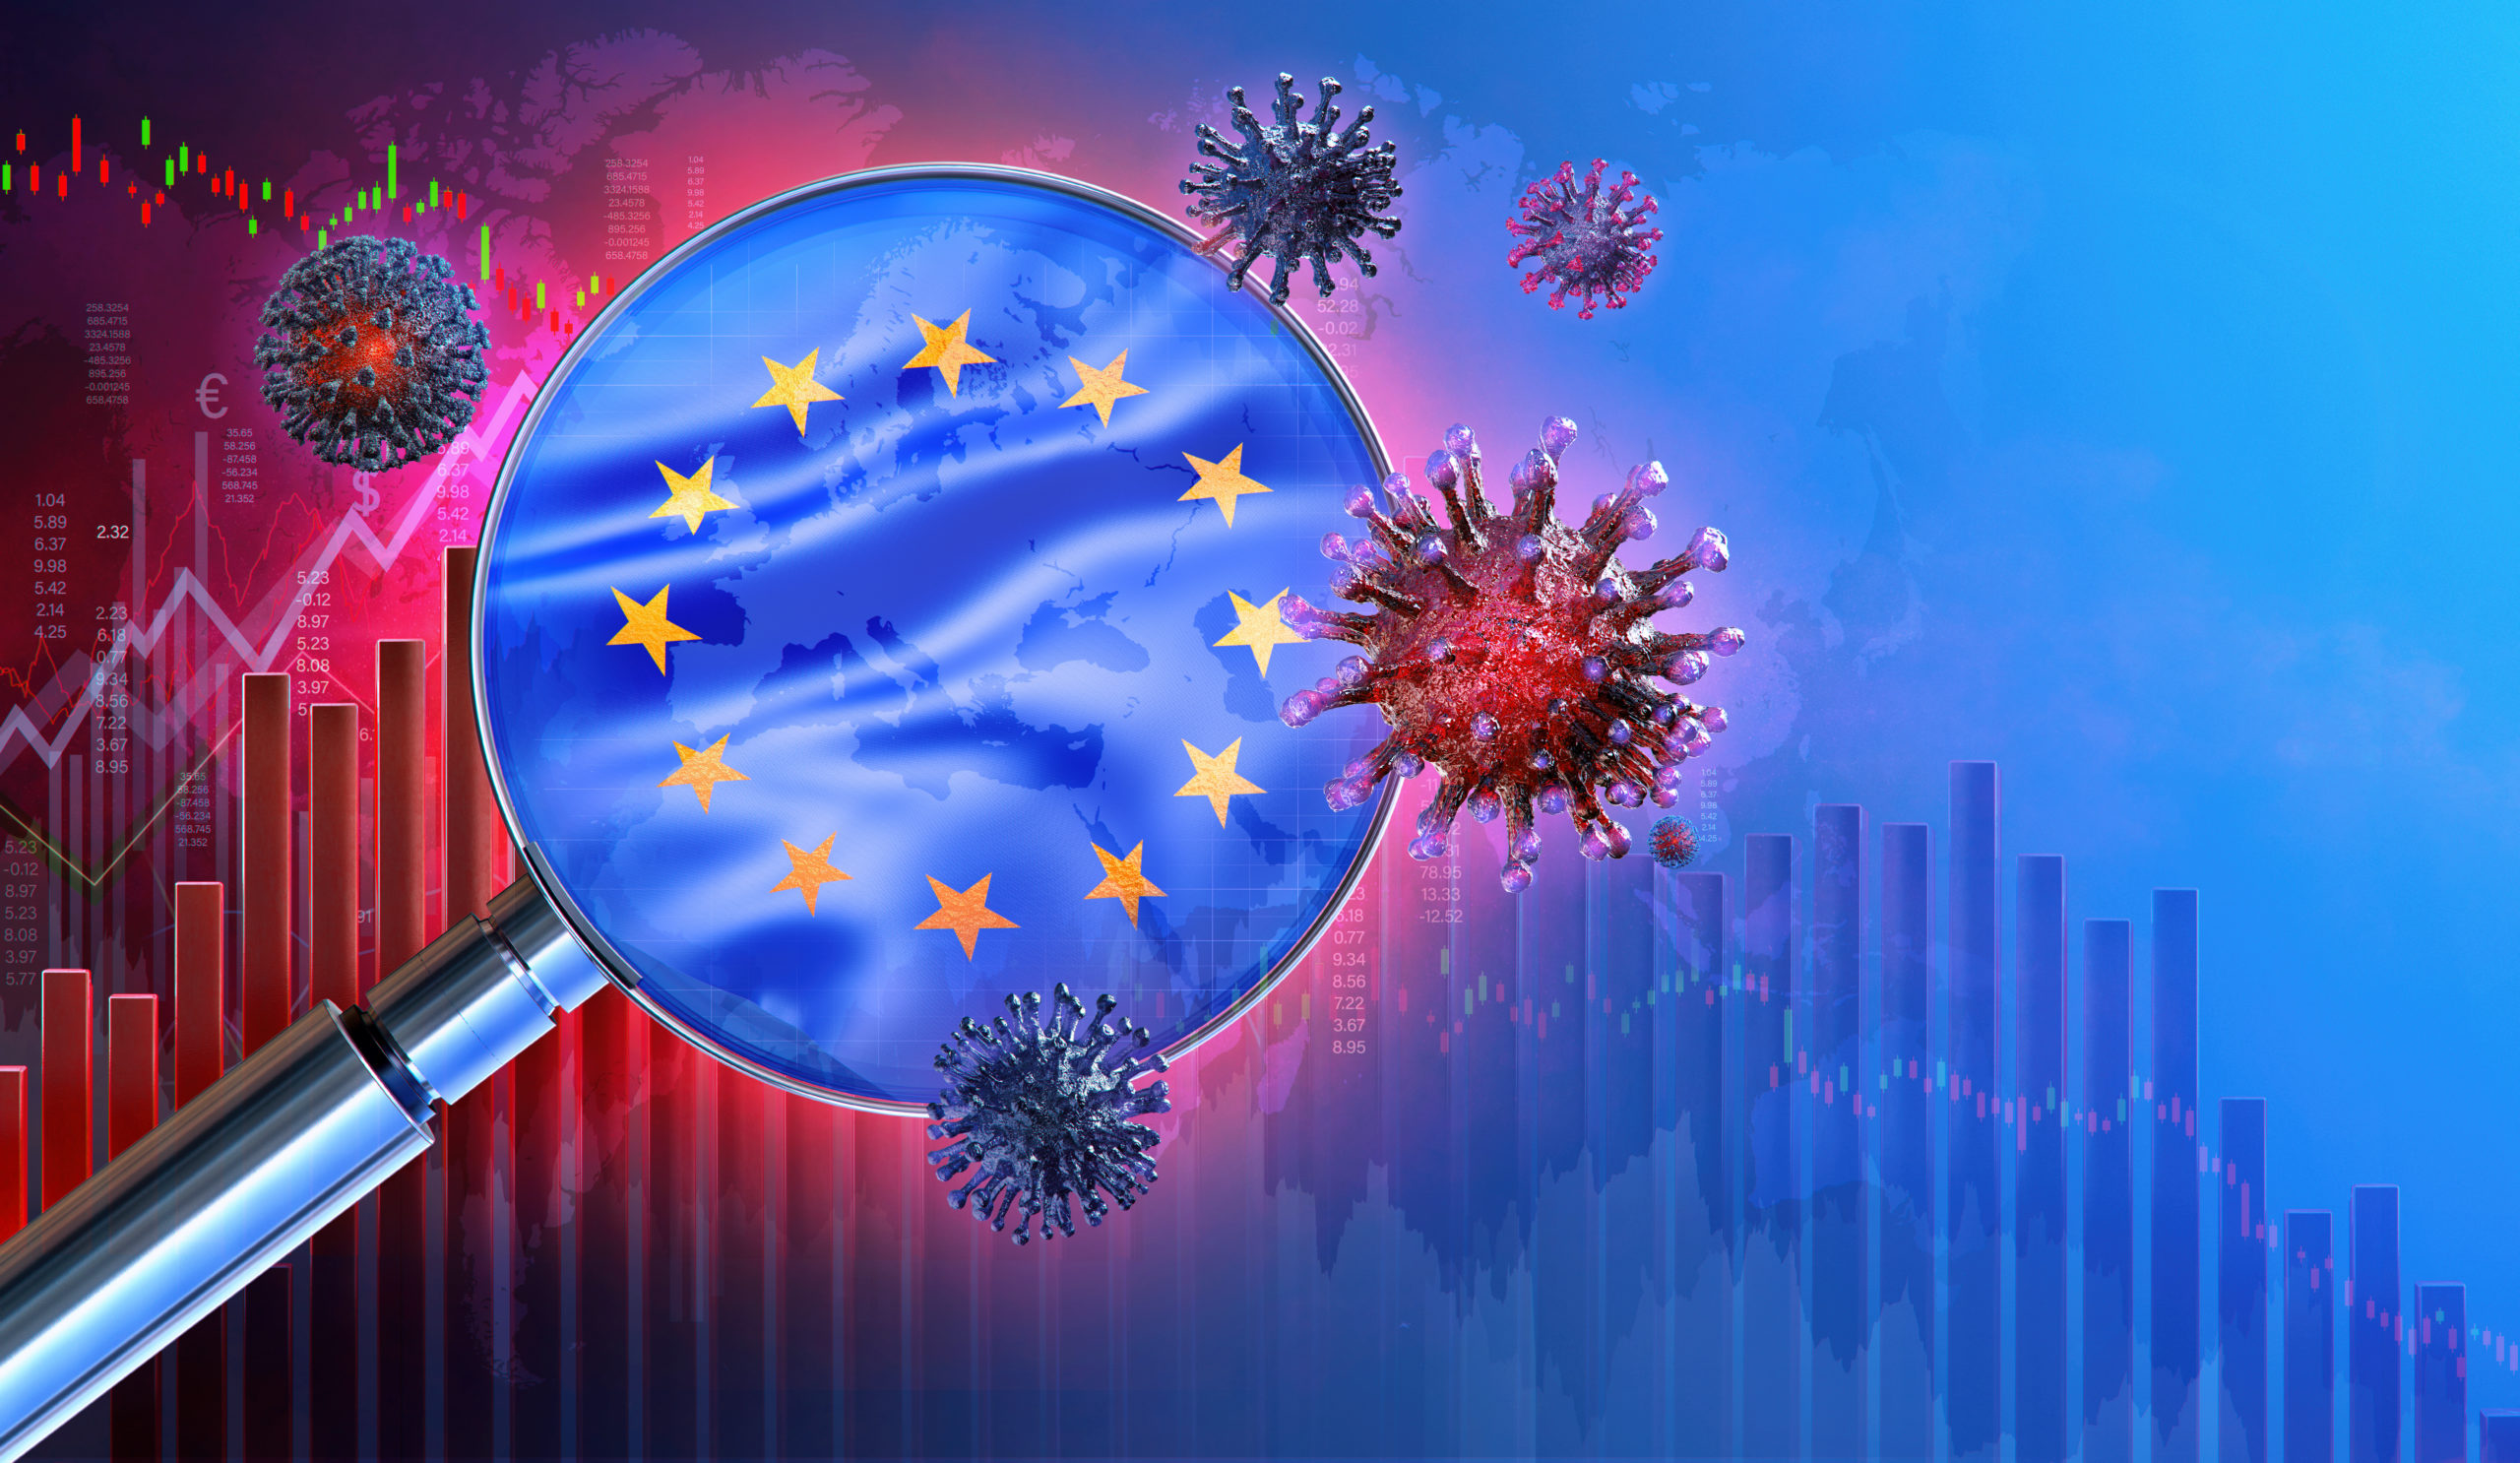 70 percent of EU population to be vaccinated “by the summer”